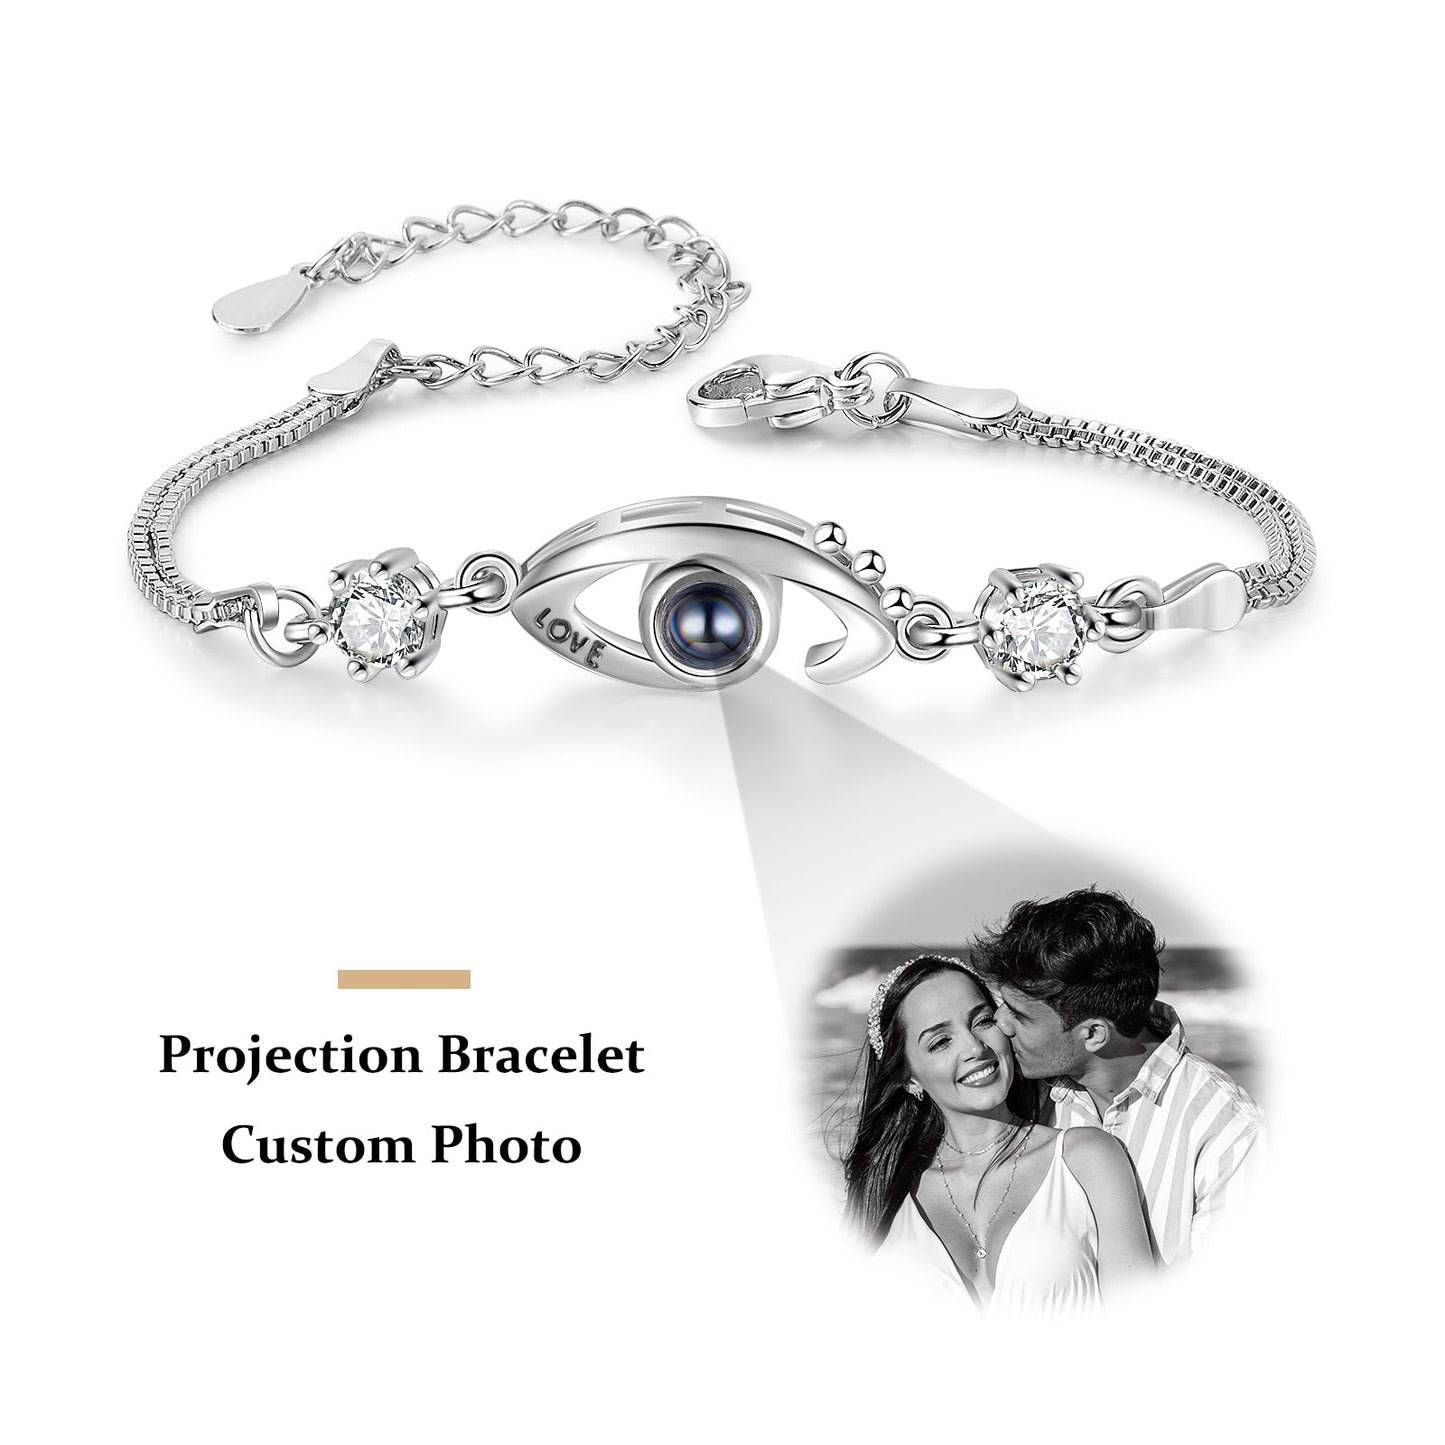 ThinkEngraved Projection necklace Black and White Photo / 316L Surgical Steel Custom Seeing Eye Photo Projection Bracelet - Color or Black and White